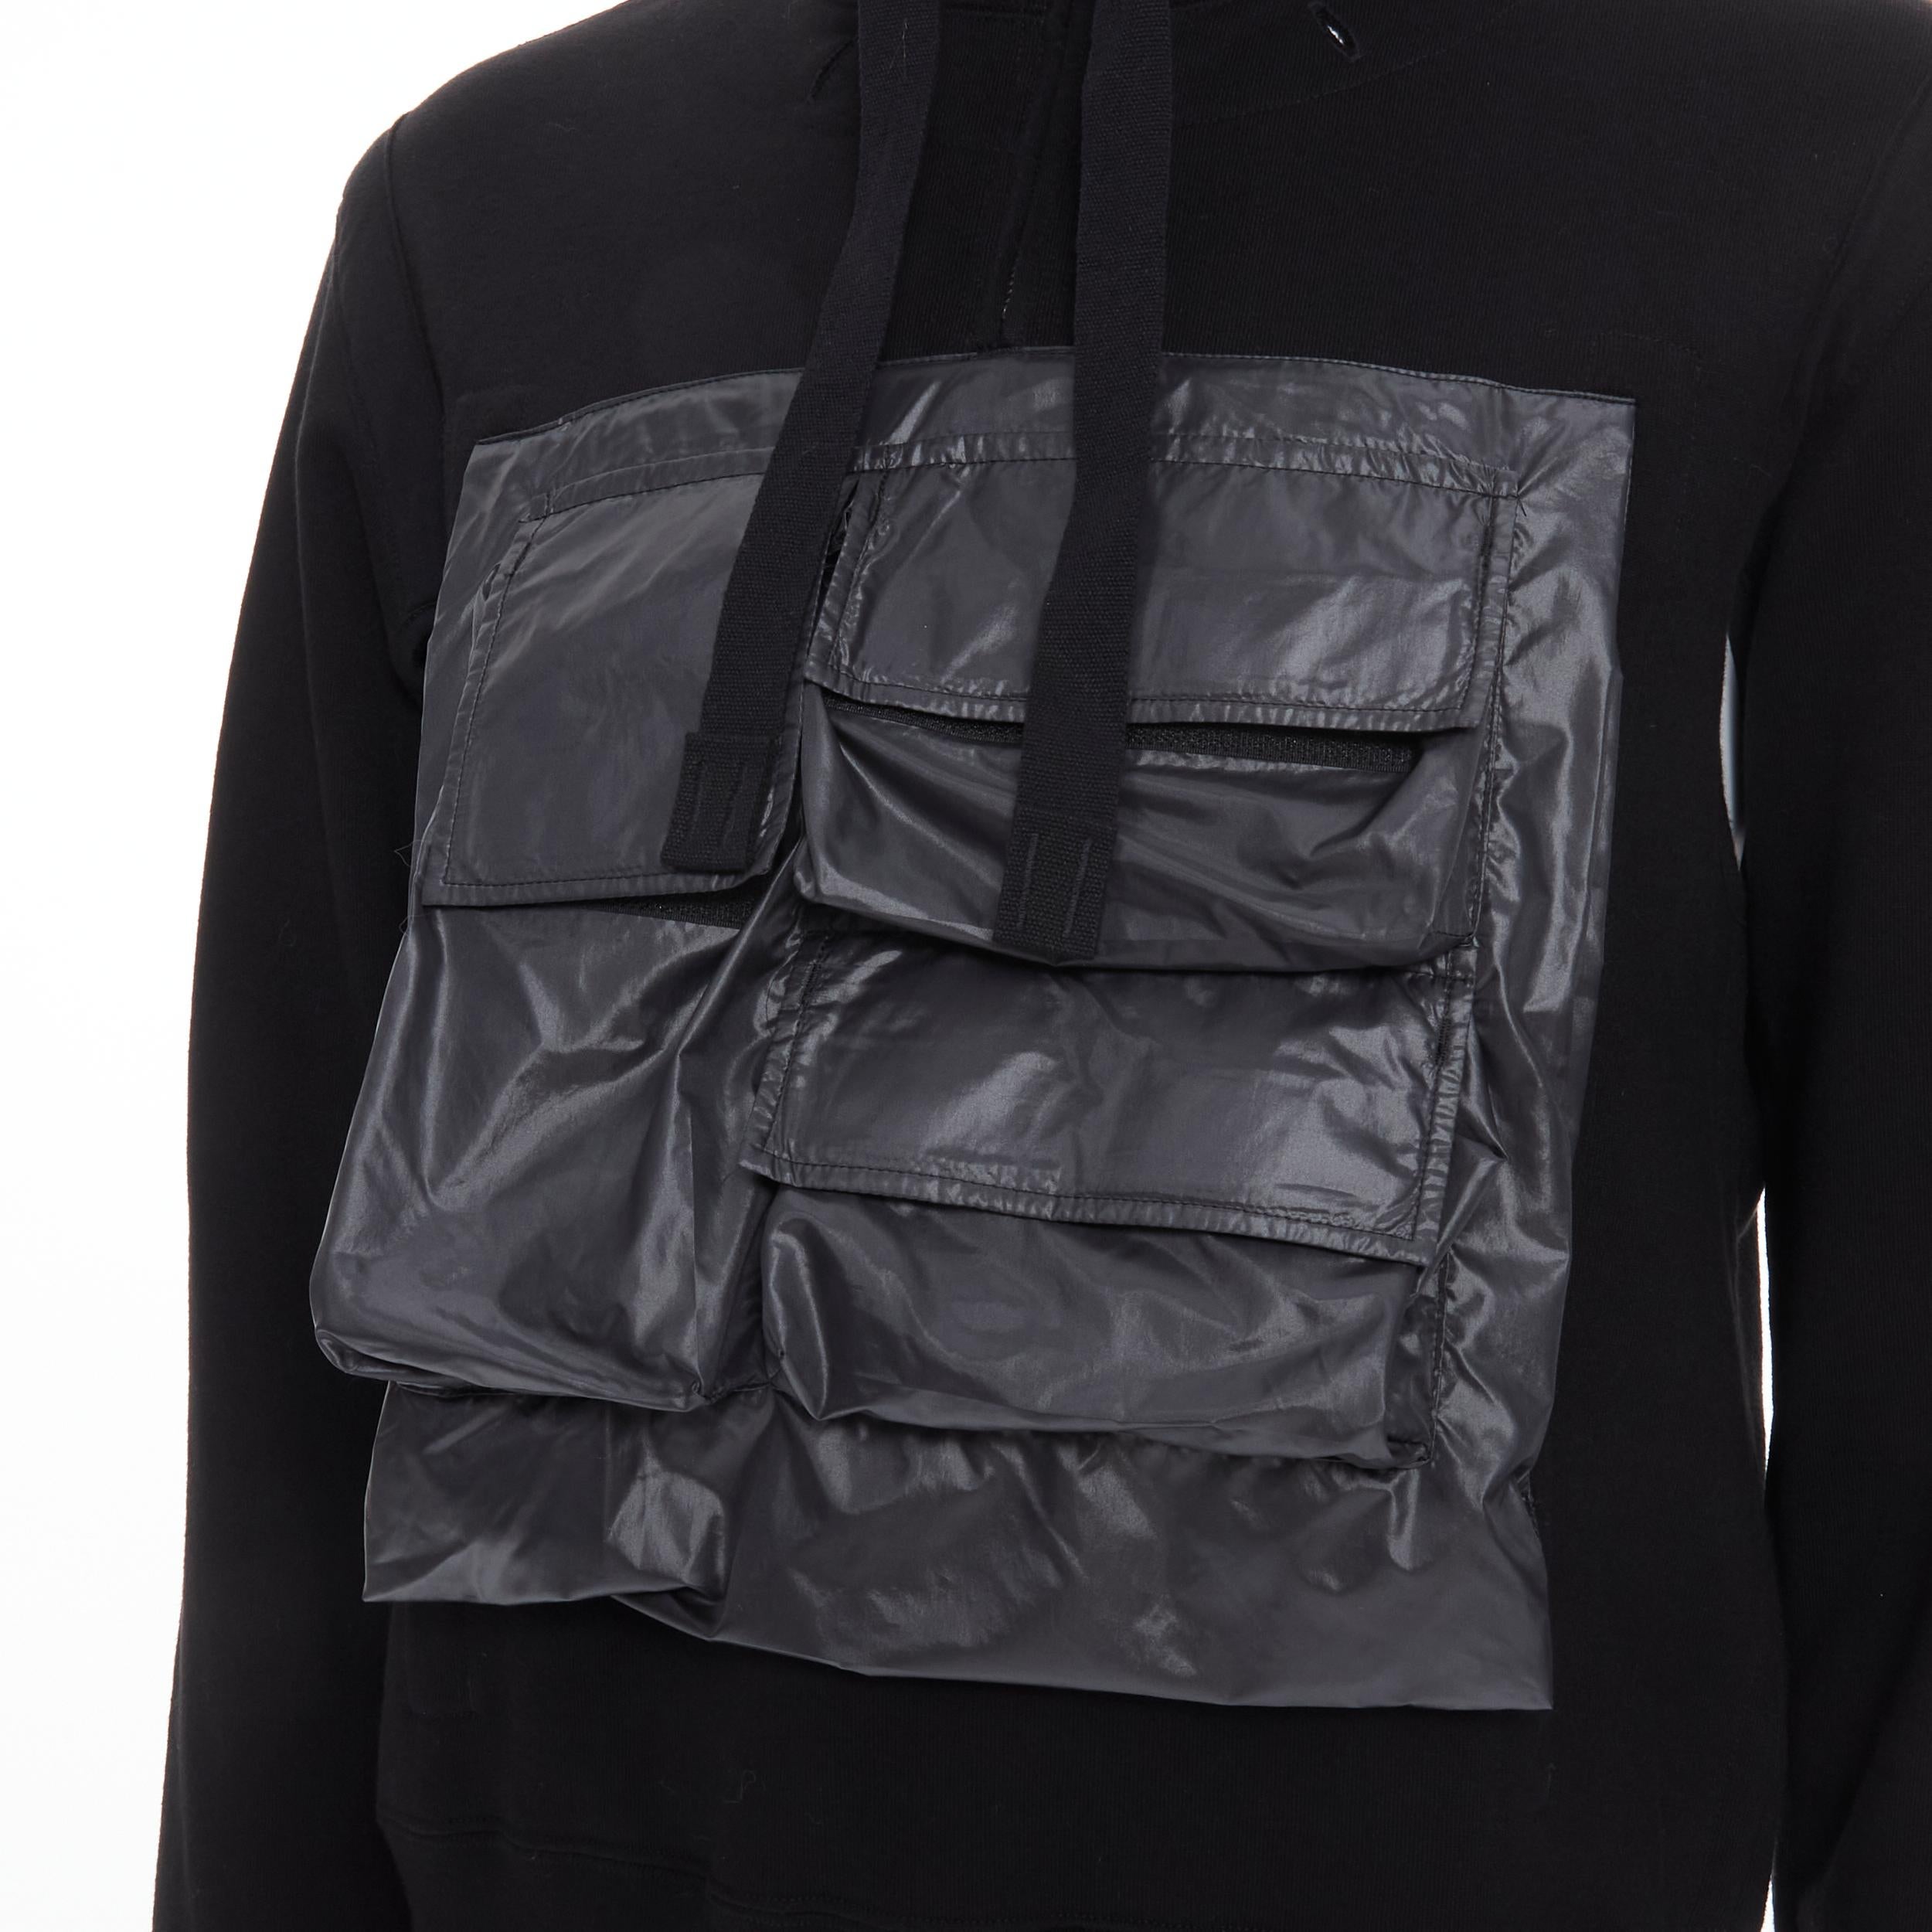 THE SOLOIST Takahiro Miyashita black nylon multi pocket cropped hoodie IT48 M 
Reference: JOMK/A00012 
Brand: The Soloist 
Designer: Takahiro Miyashita 
Material: Cotton 
Color: Black 
Pattern: Solid 
Extra Detail: Nylon pockets at front. Silver